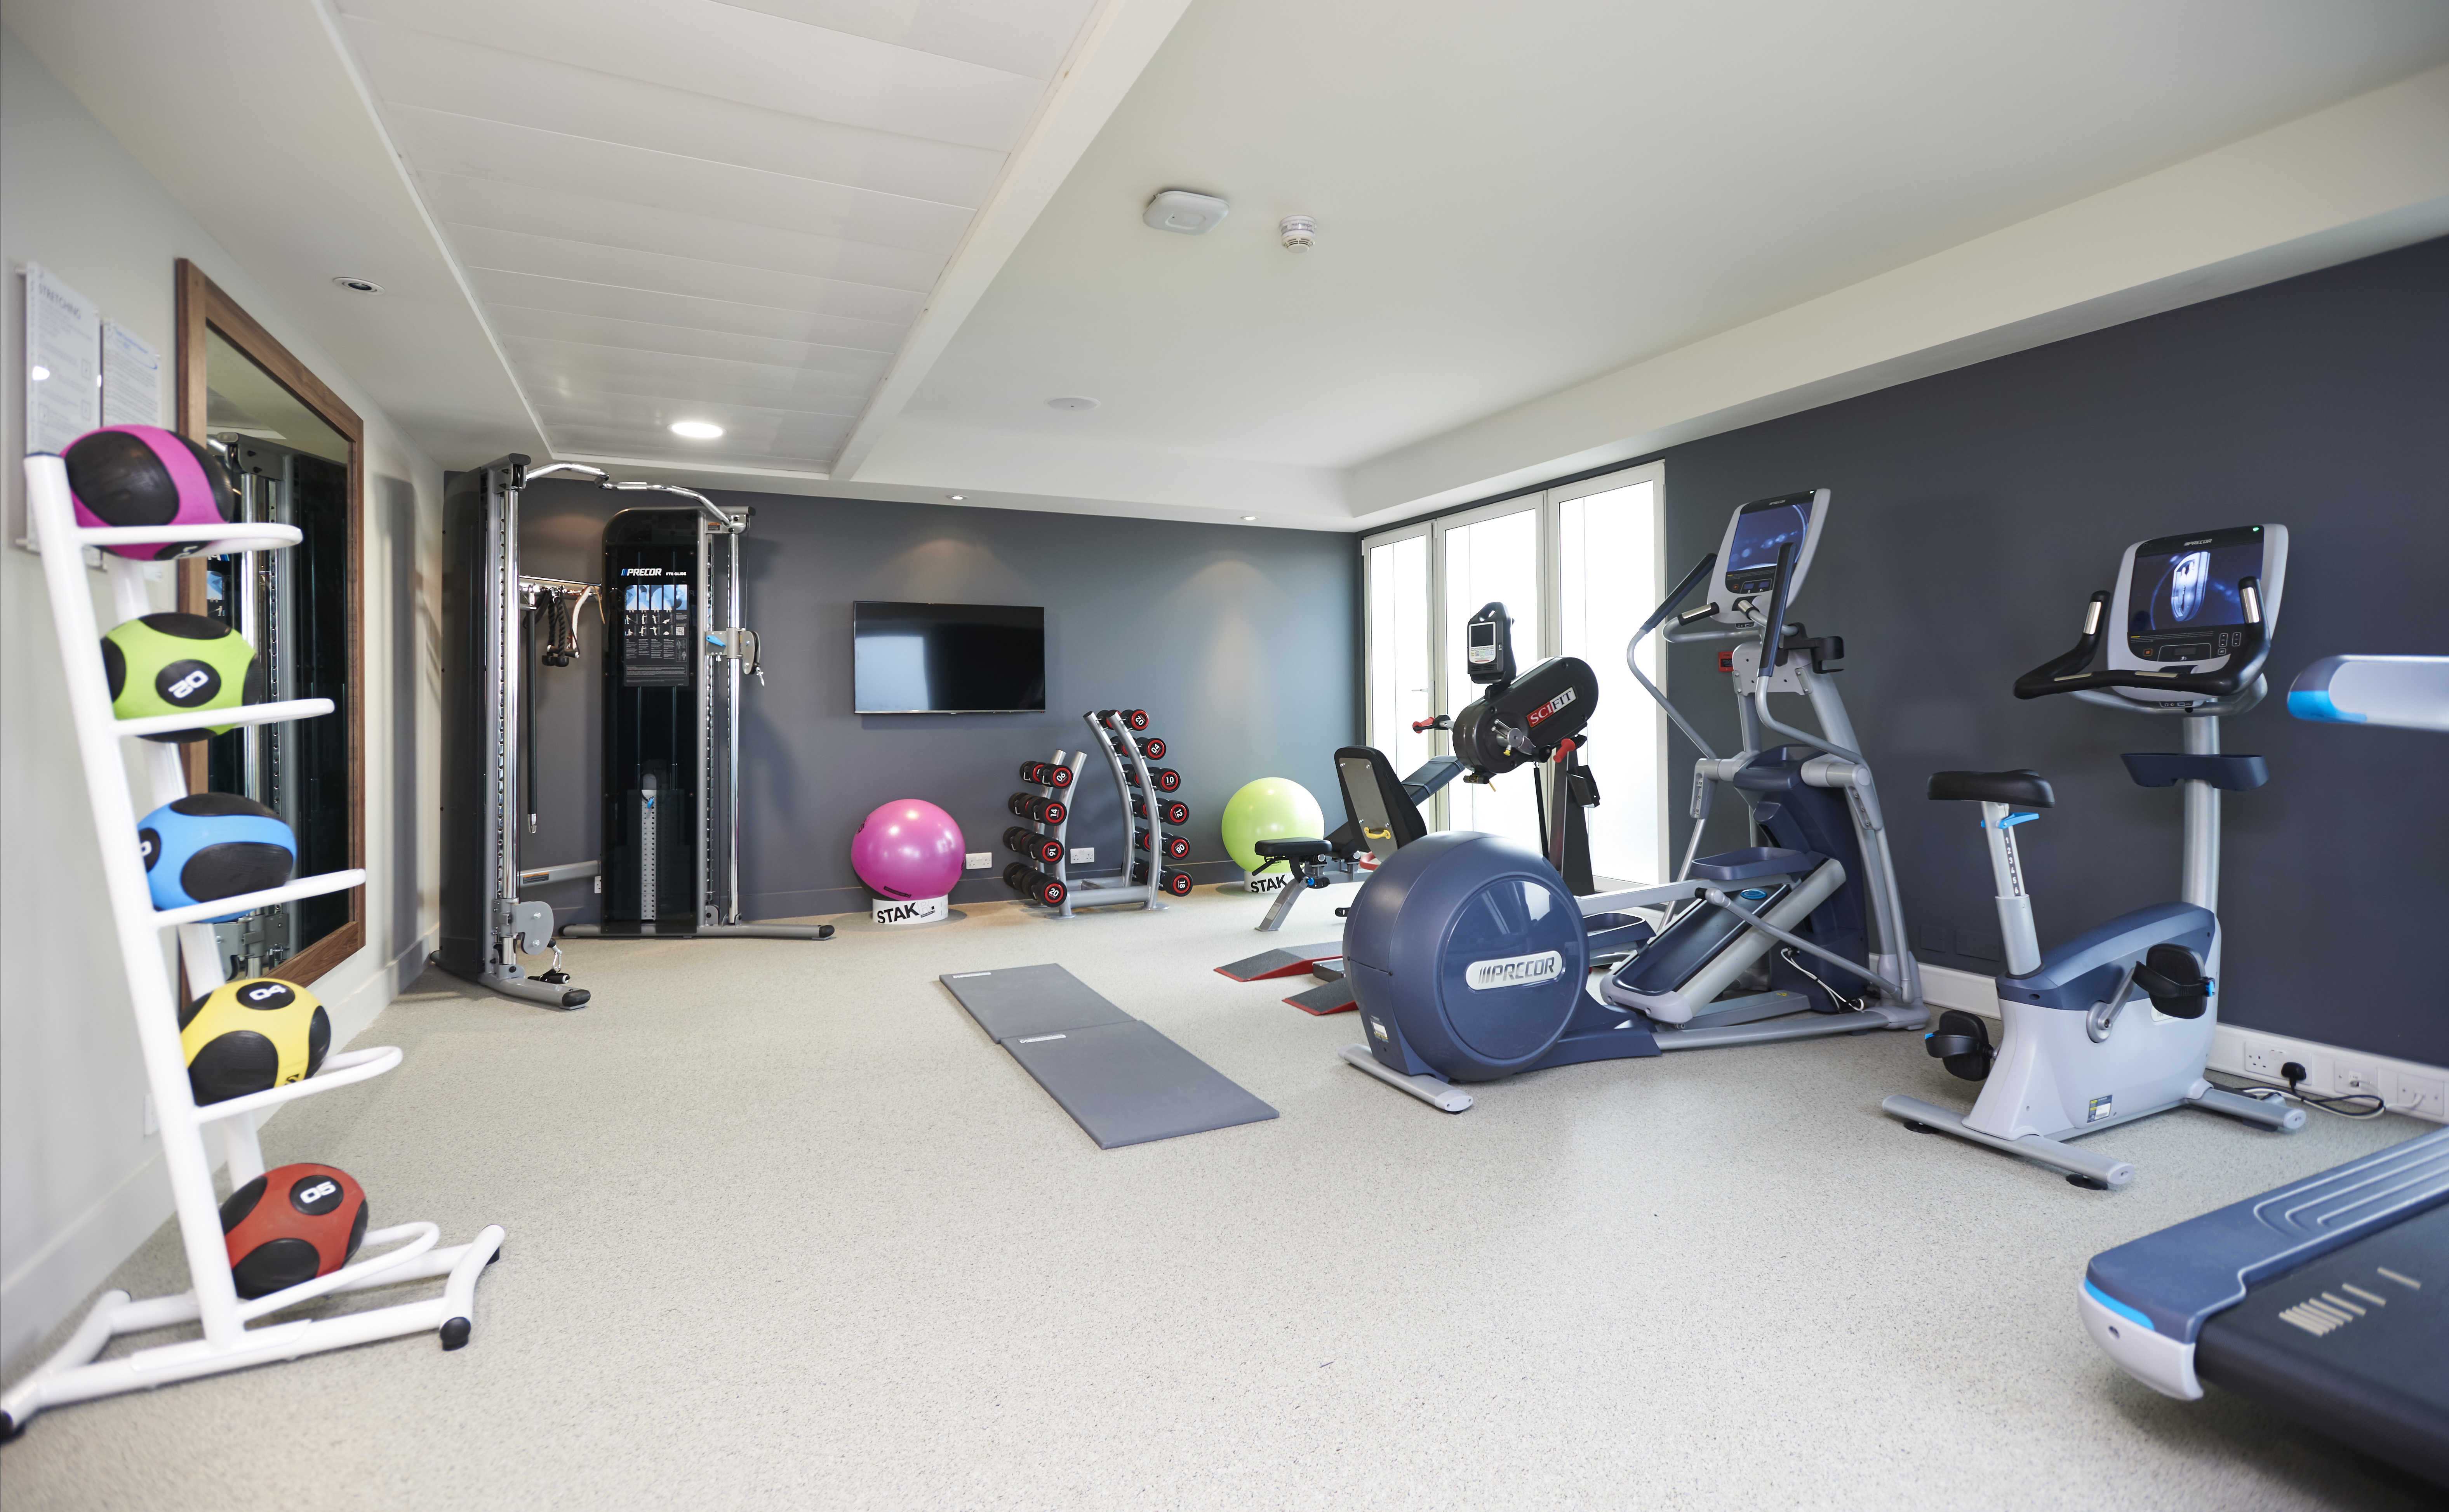 Fitness Center with Weights and Cardio Equipment